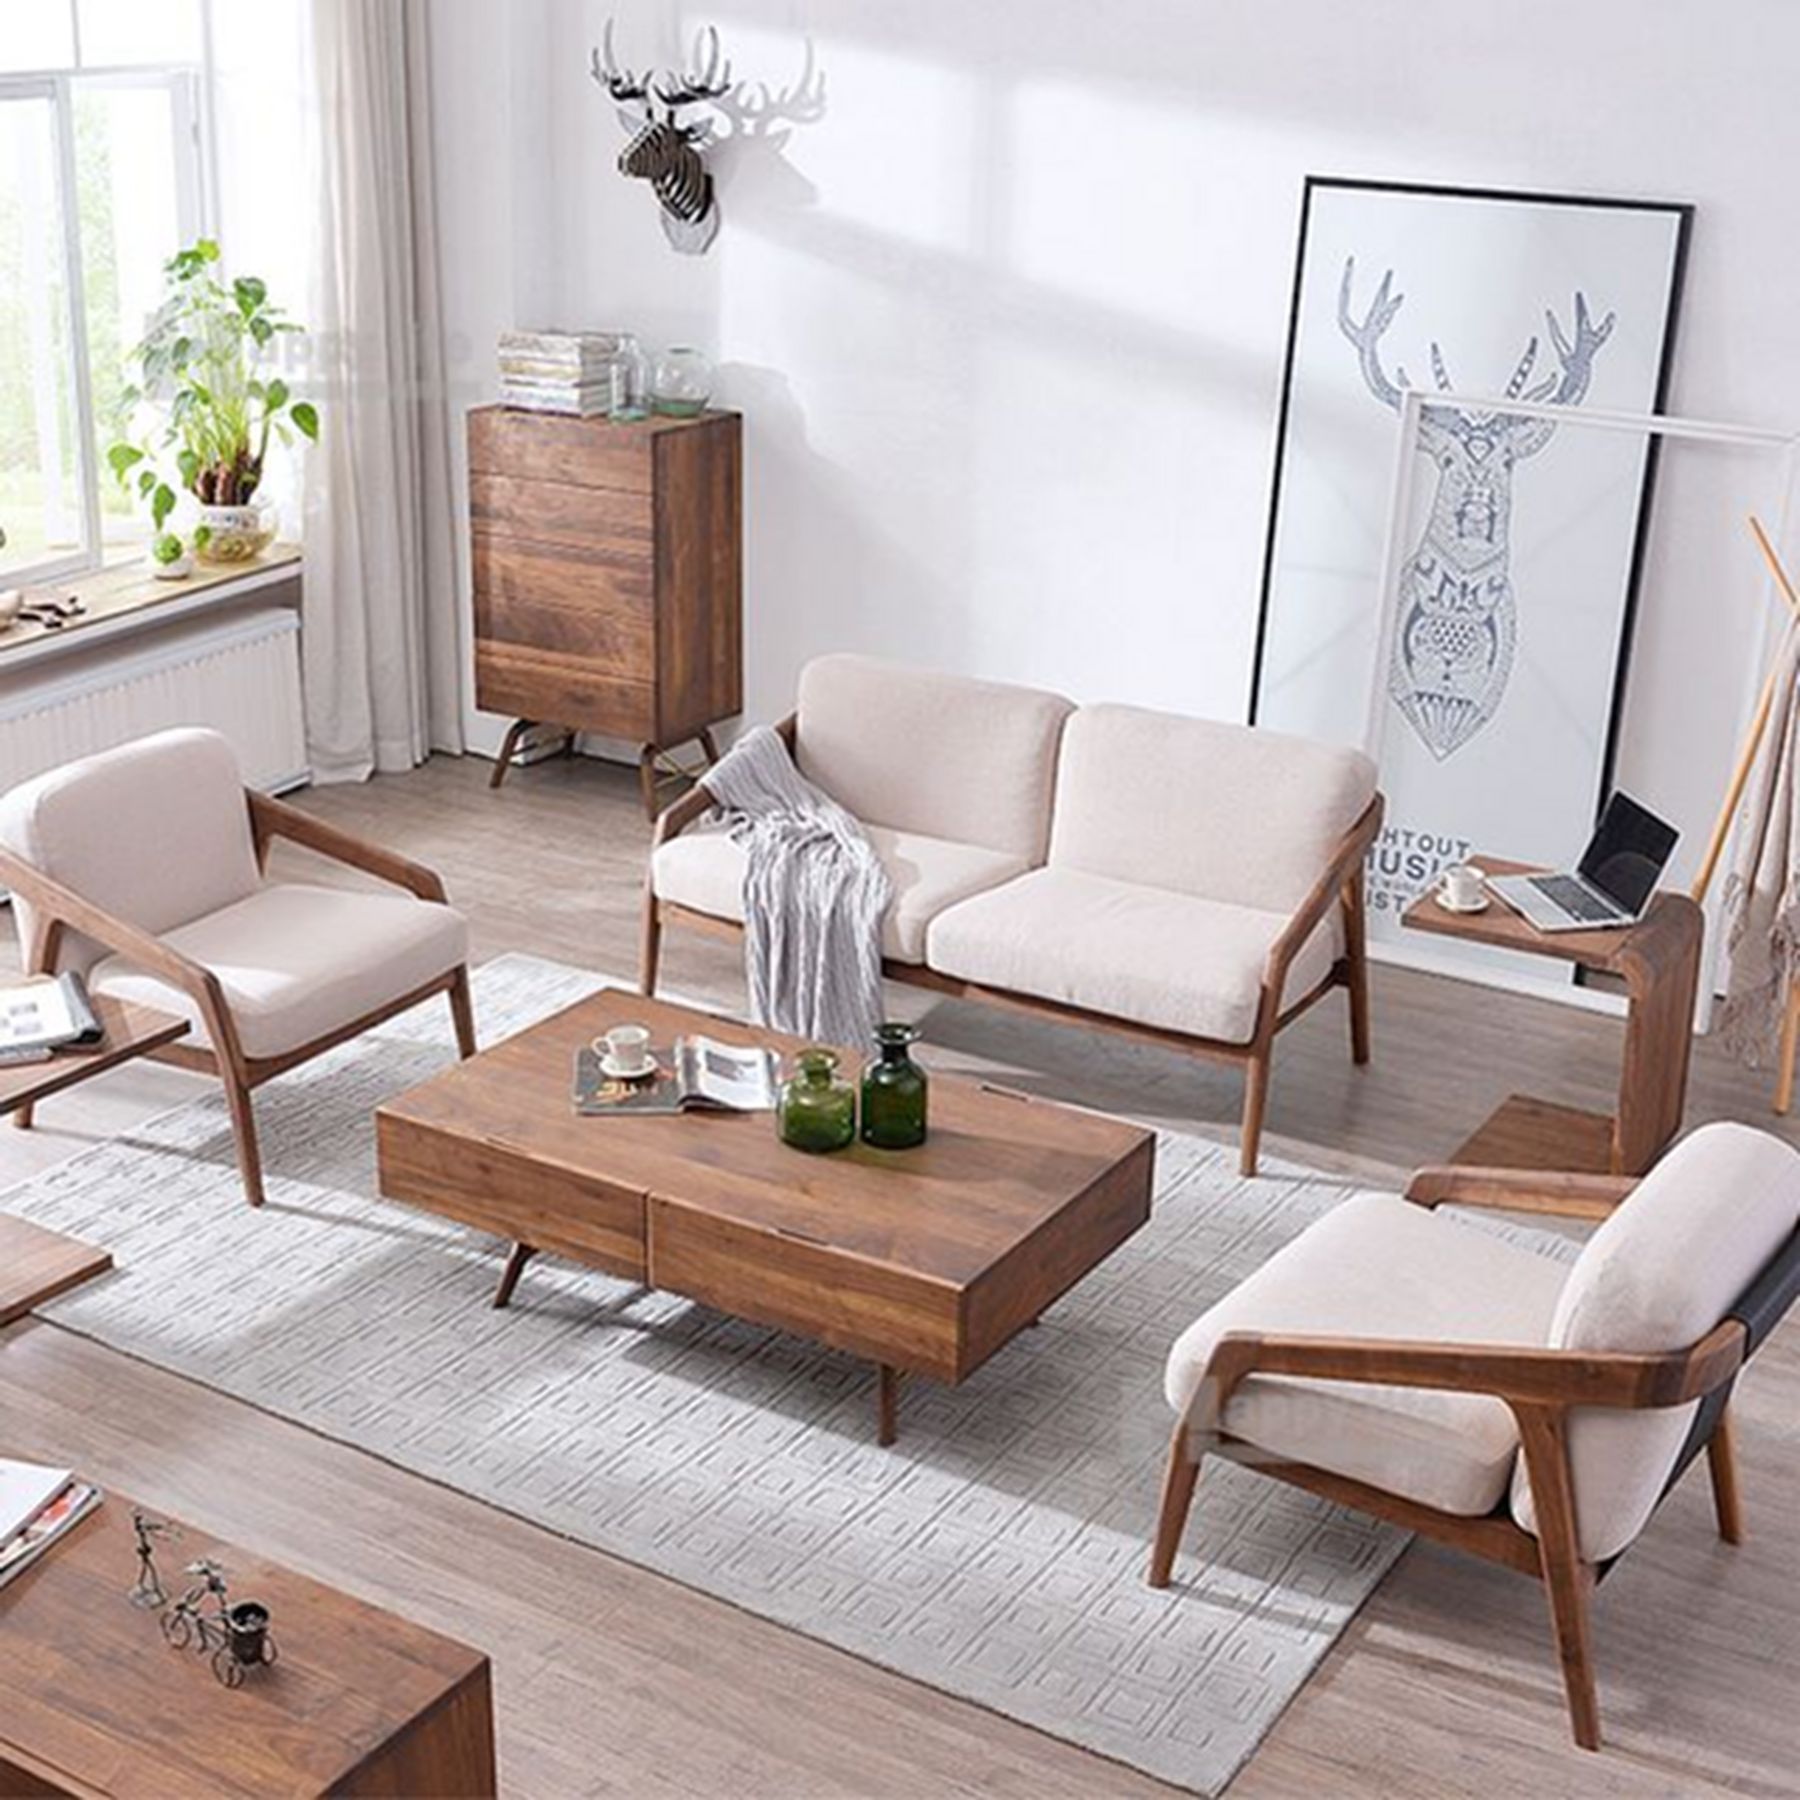 Furniture For A Scandinavian inspired Home